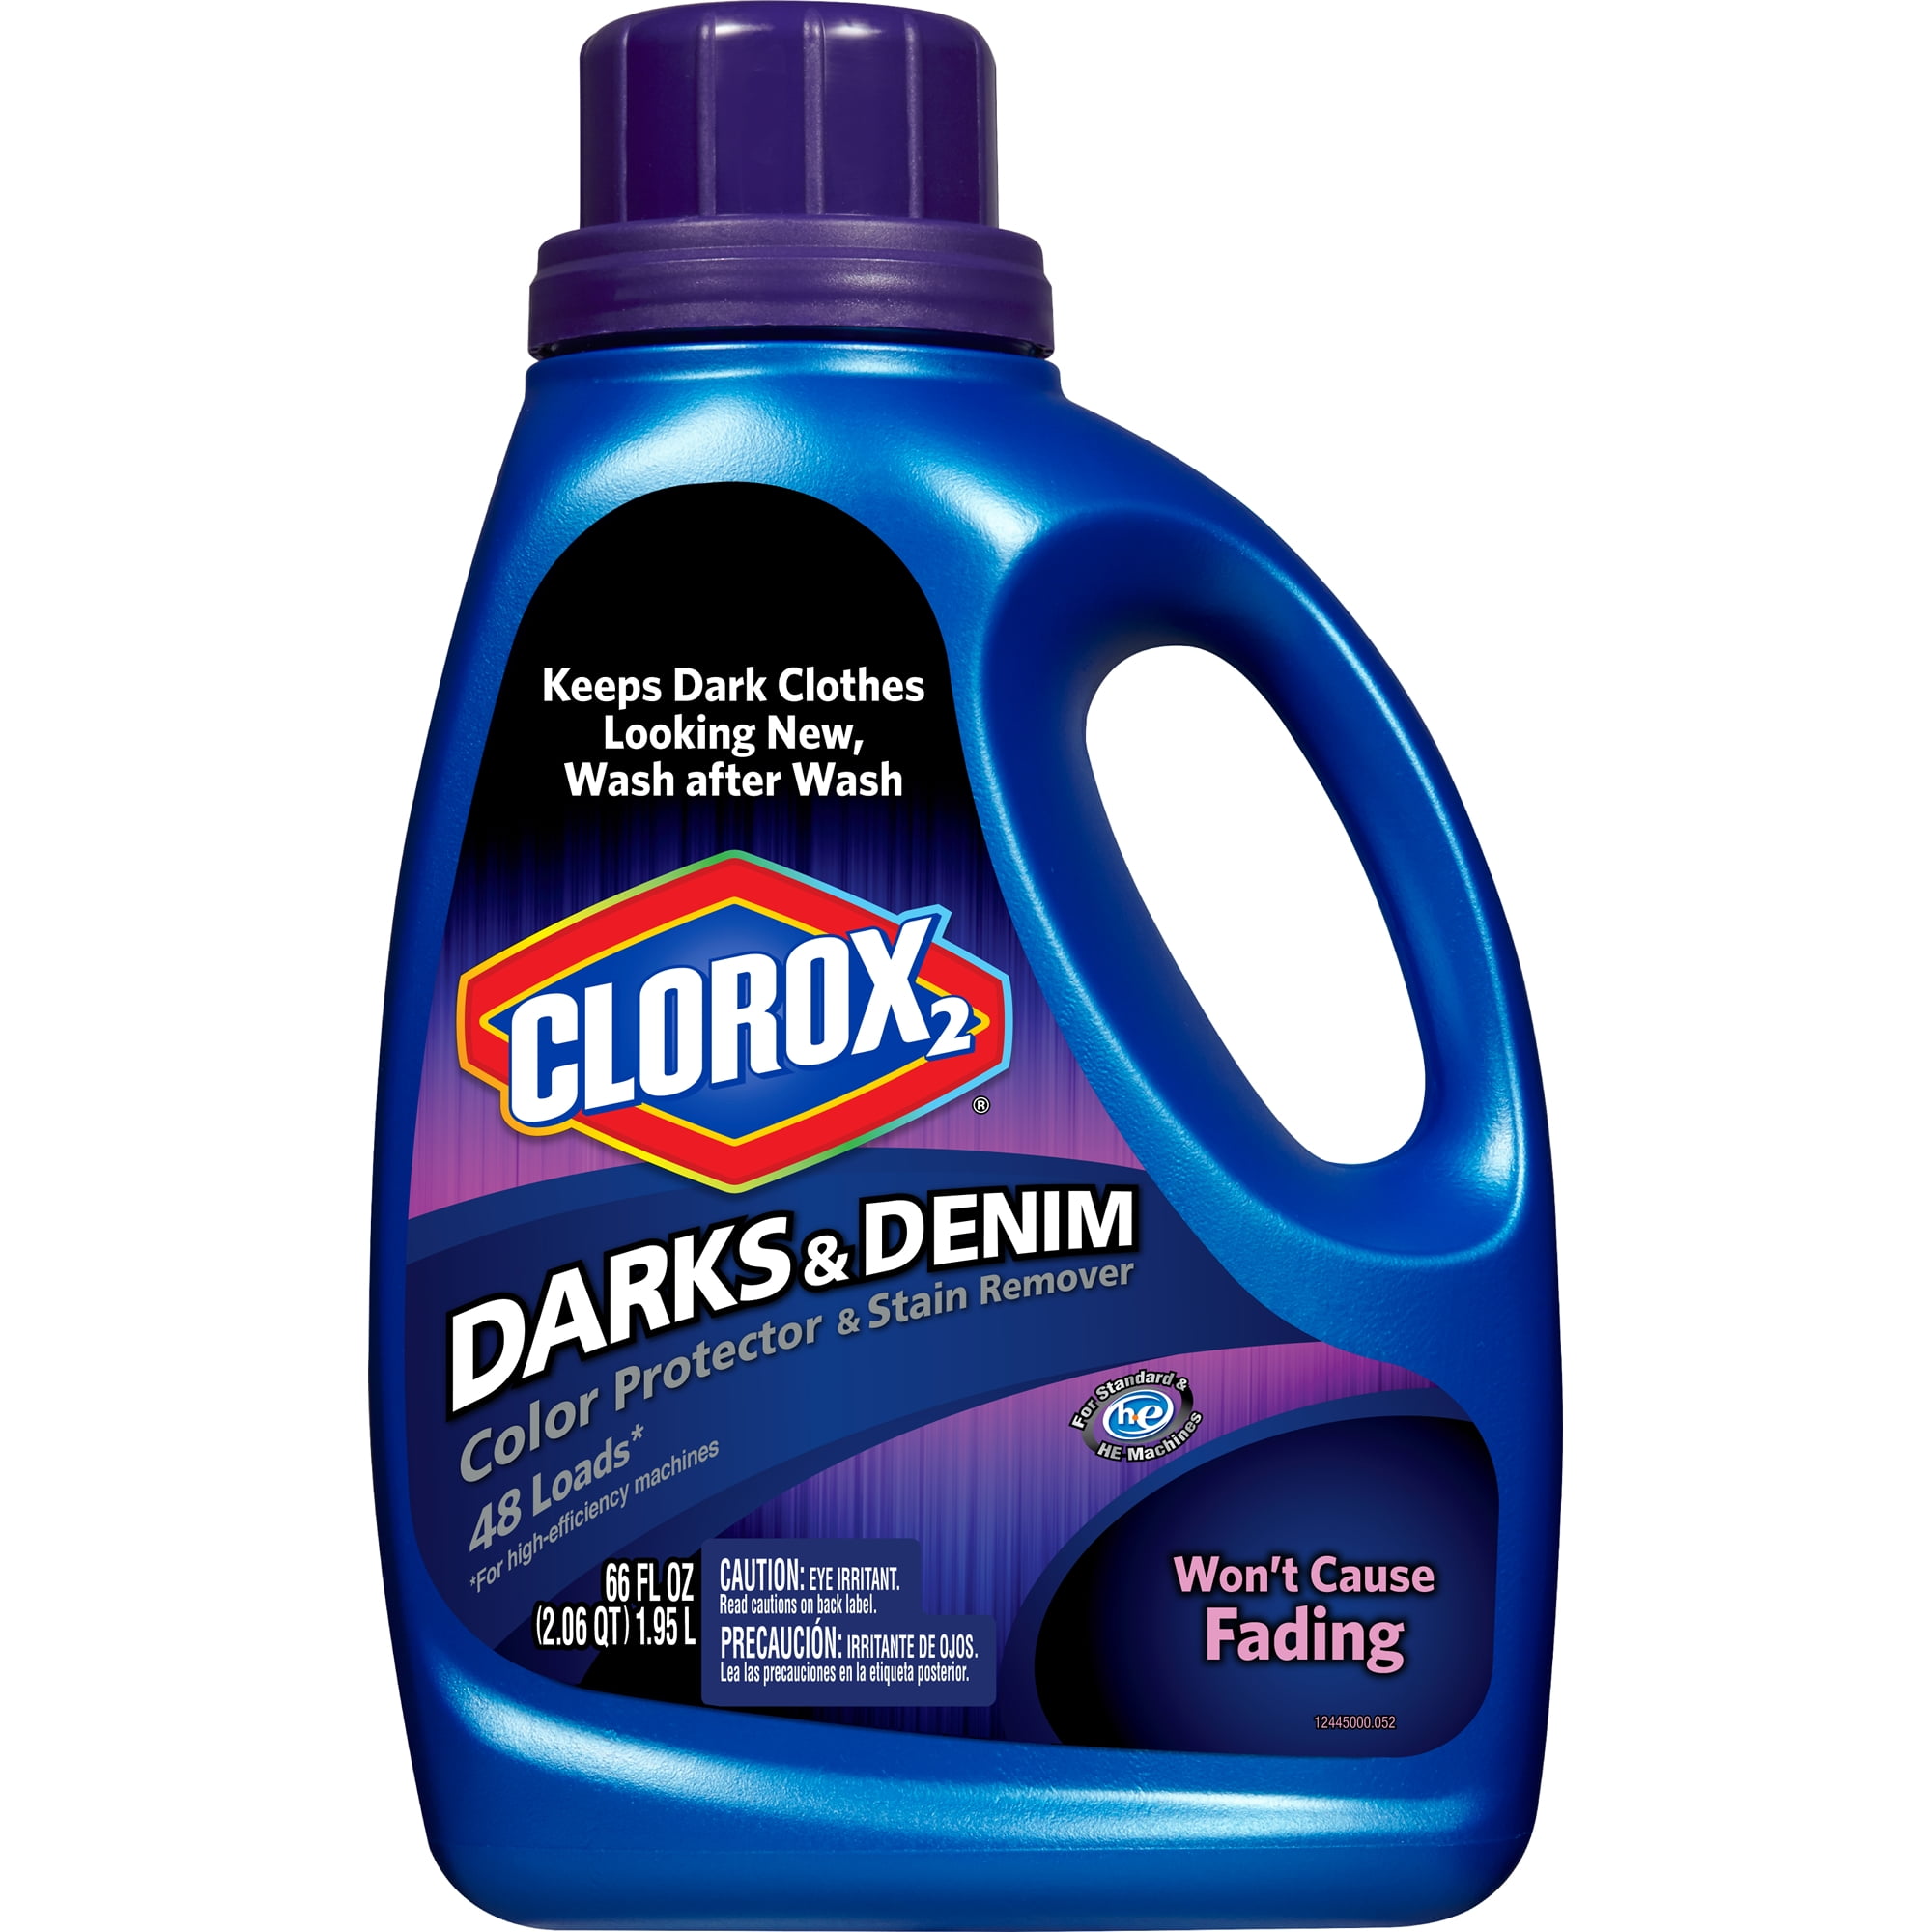 Clorox 2 Laundry Color Protector and Stain Remover, Darks & Denim, 66